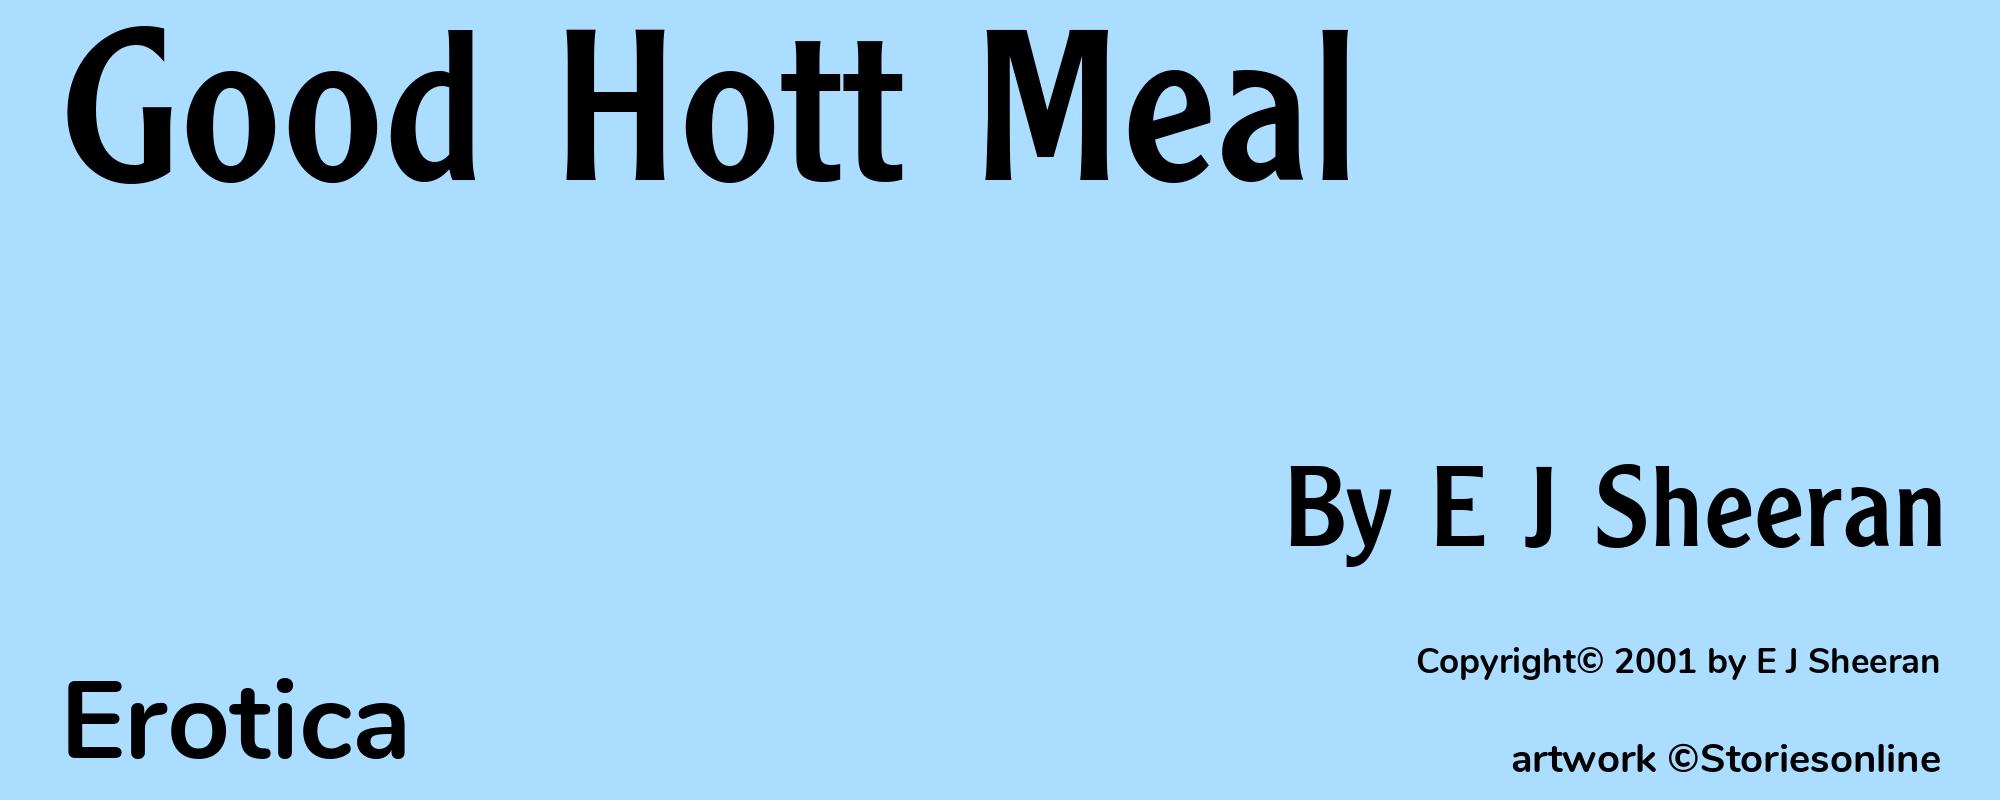 Good Hott Meal - Cover